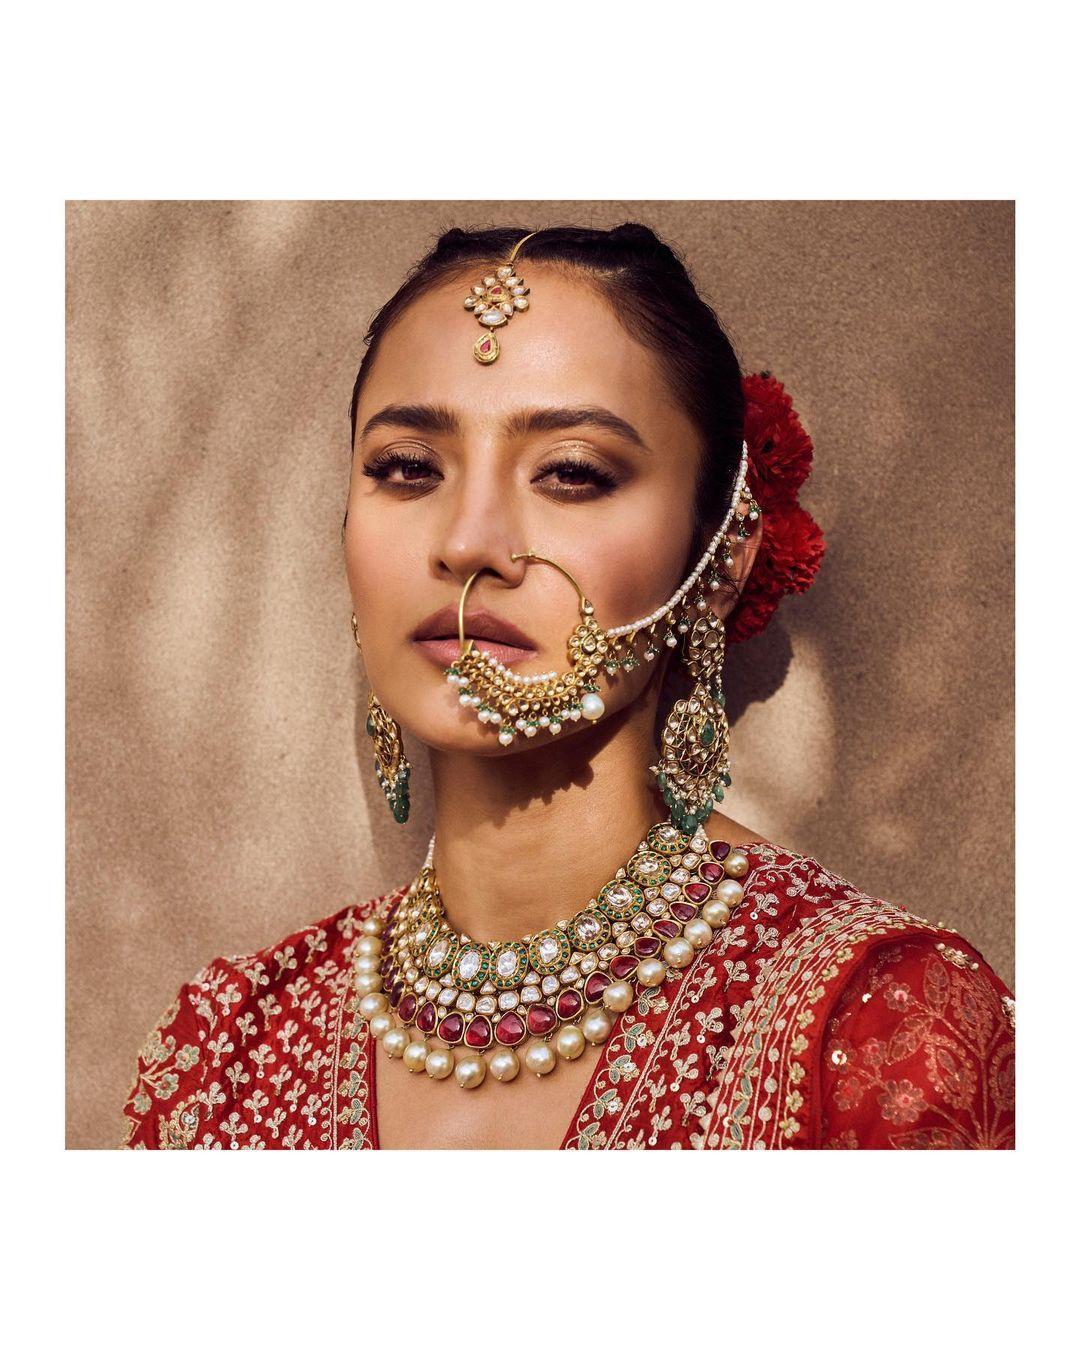 class="content__text"
 The standout Lakshaki necklace is handcrafted with love. Uncut diamonds and south sea pearls frame this piece. ​

 #AnitaDongre #AnitaDongrePinkcity #FineJewelry 

WhatsApp us on +91 9999313366 to know more. 
 